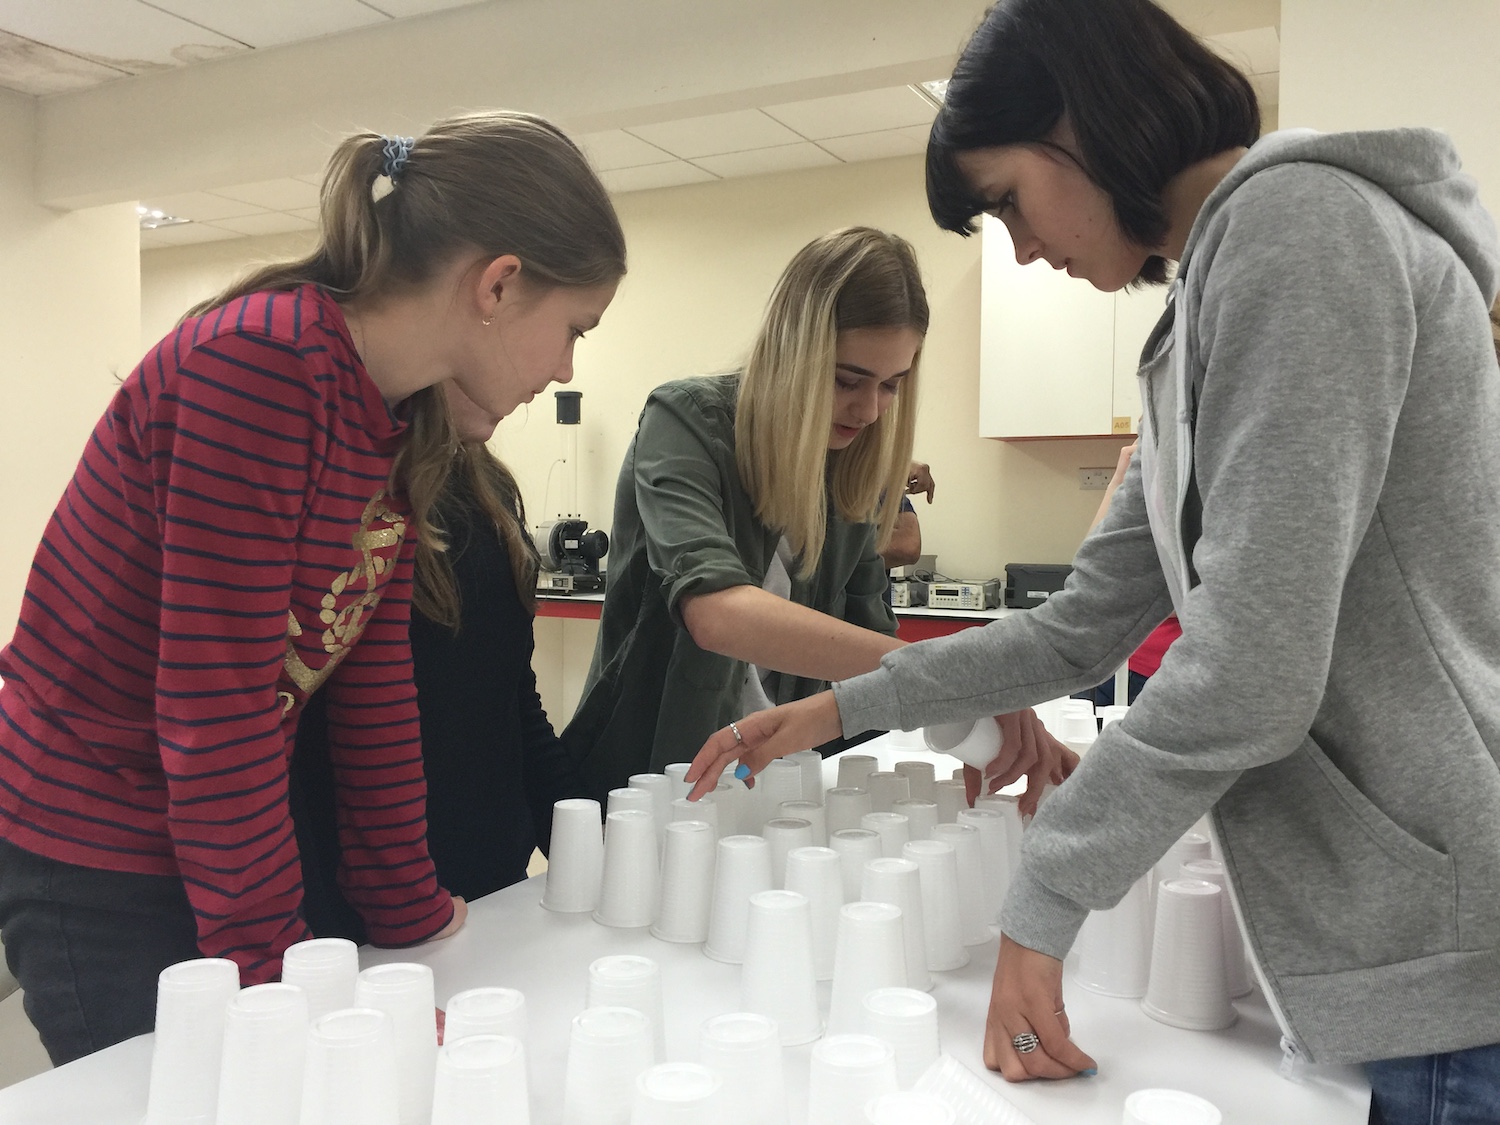 A group of girls arranging cups.